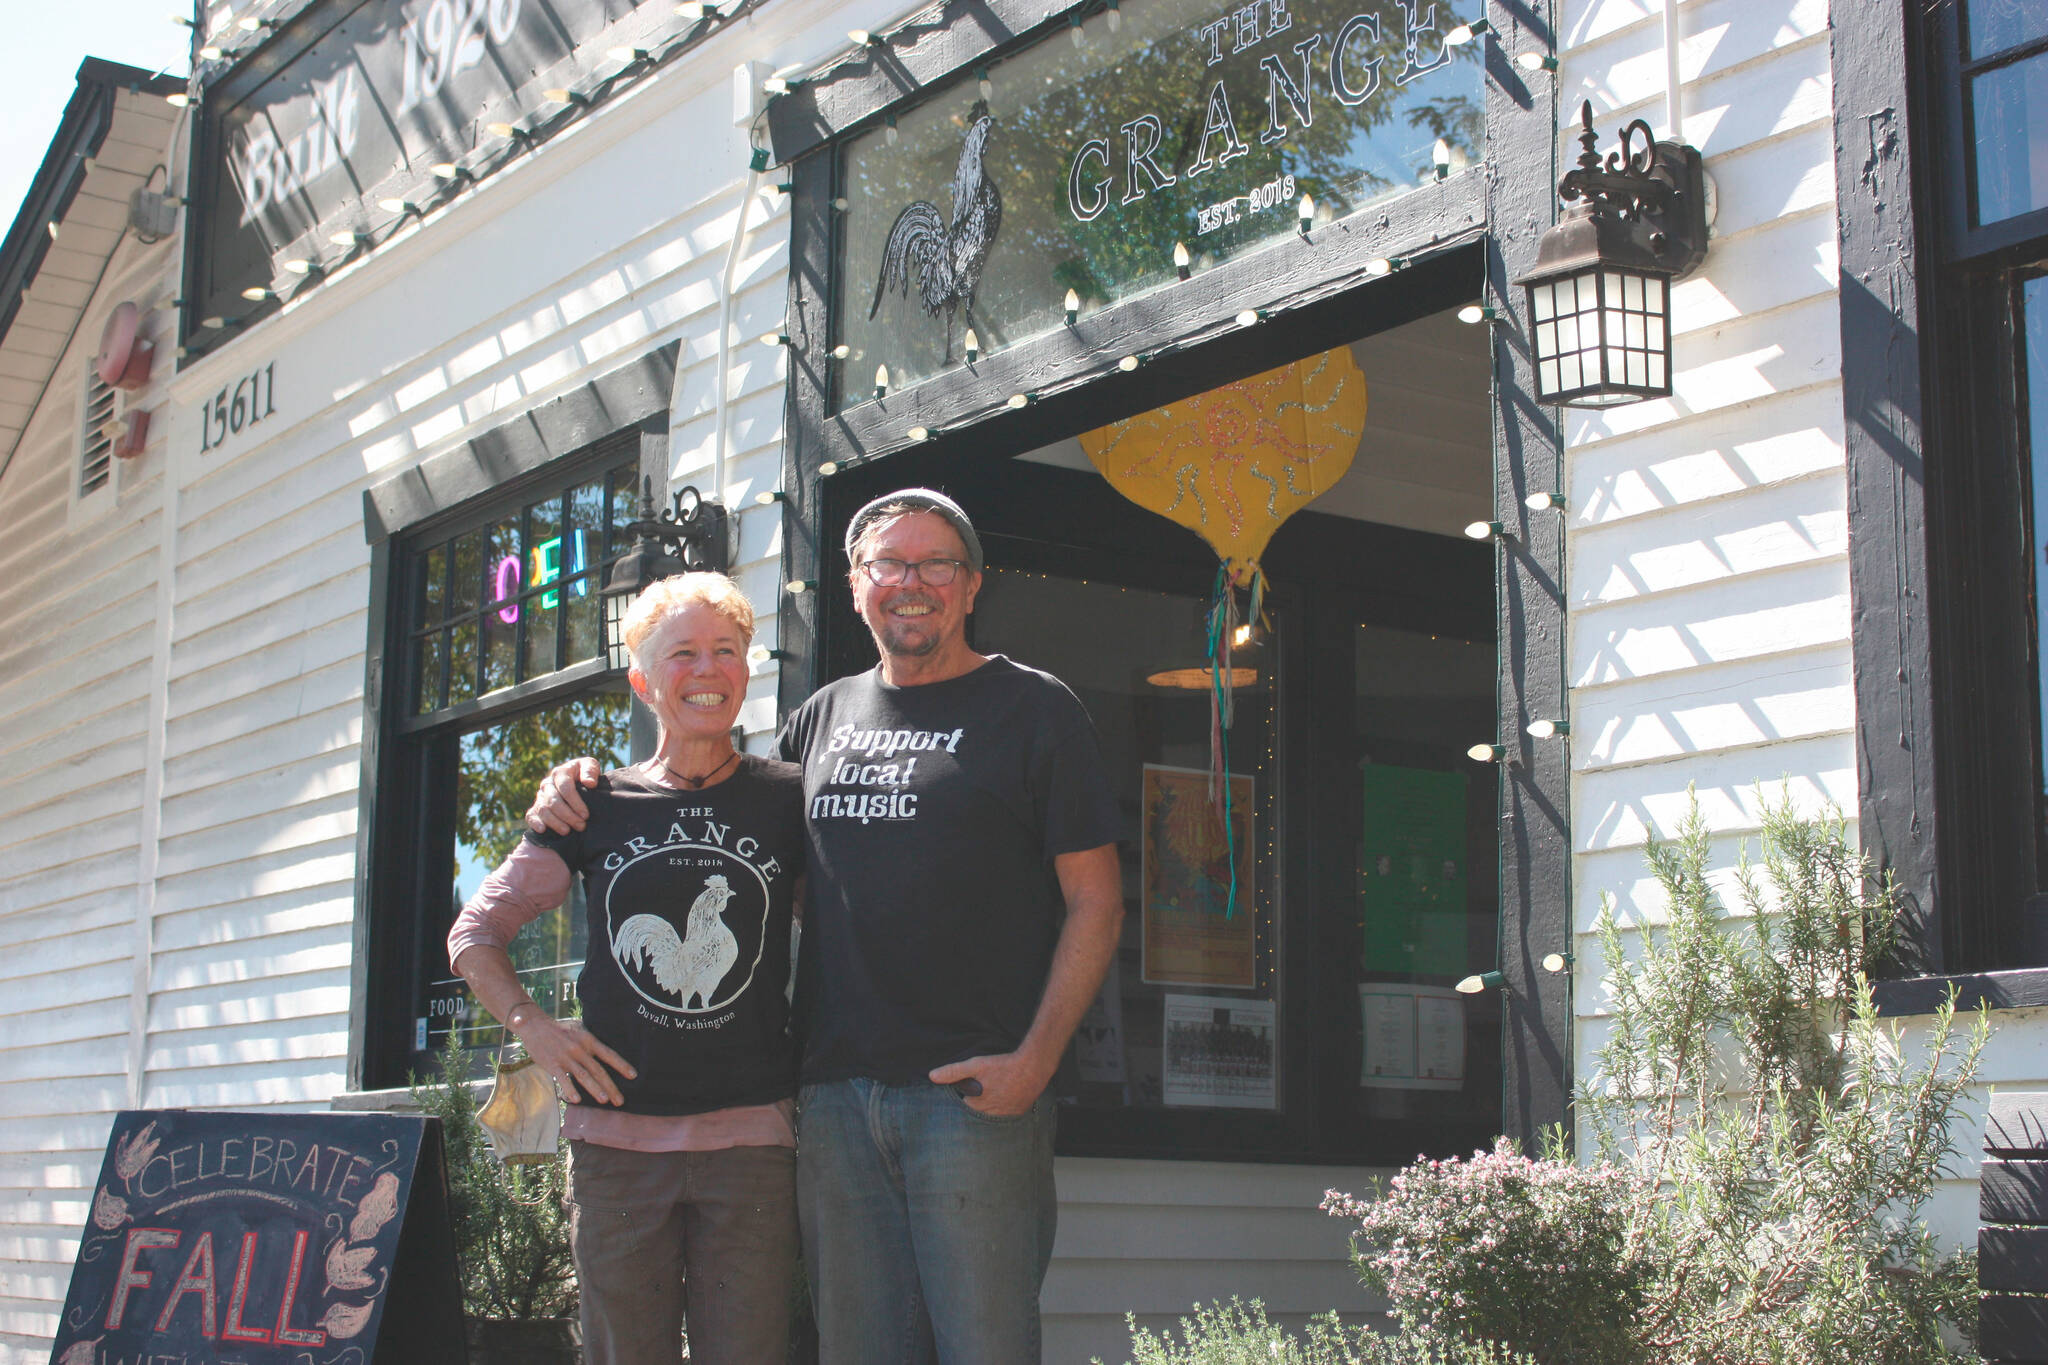 Co-owners Sarah Cassidy and Luke Woodward stand in front of The Grange (photo by Cameron Sheppard)